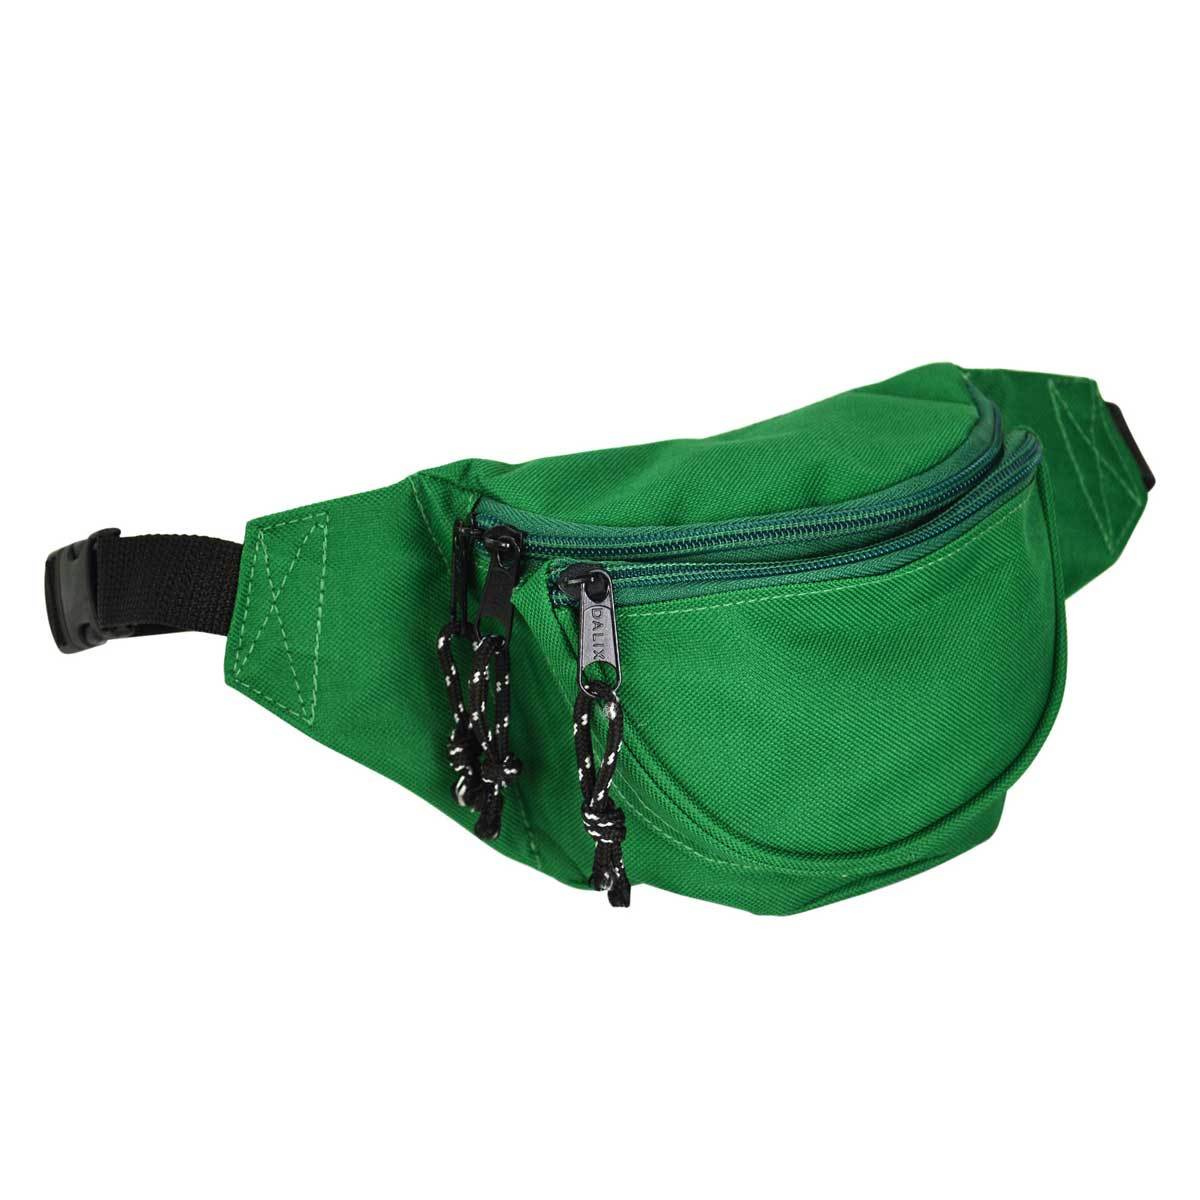 DALIX Fanny Pack w/ 3 Pockets Traveling Concealment Pouch Airport Money Bag FP-001 Fanny Packs DALIX Green 